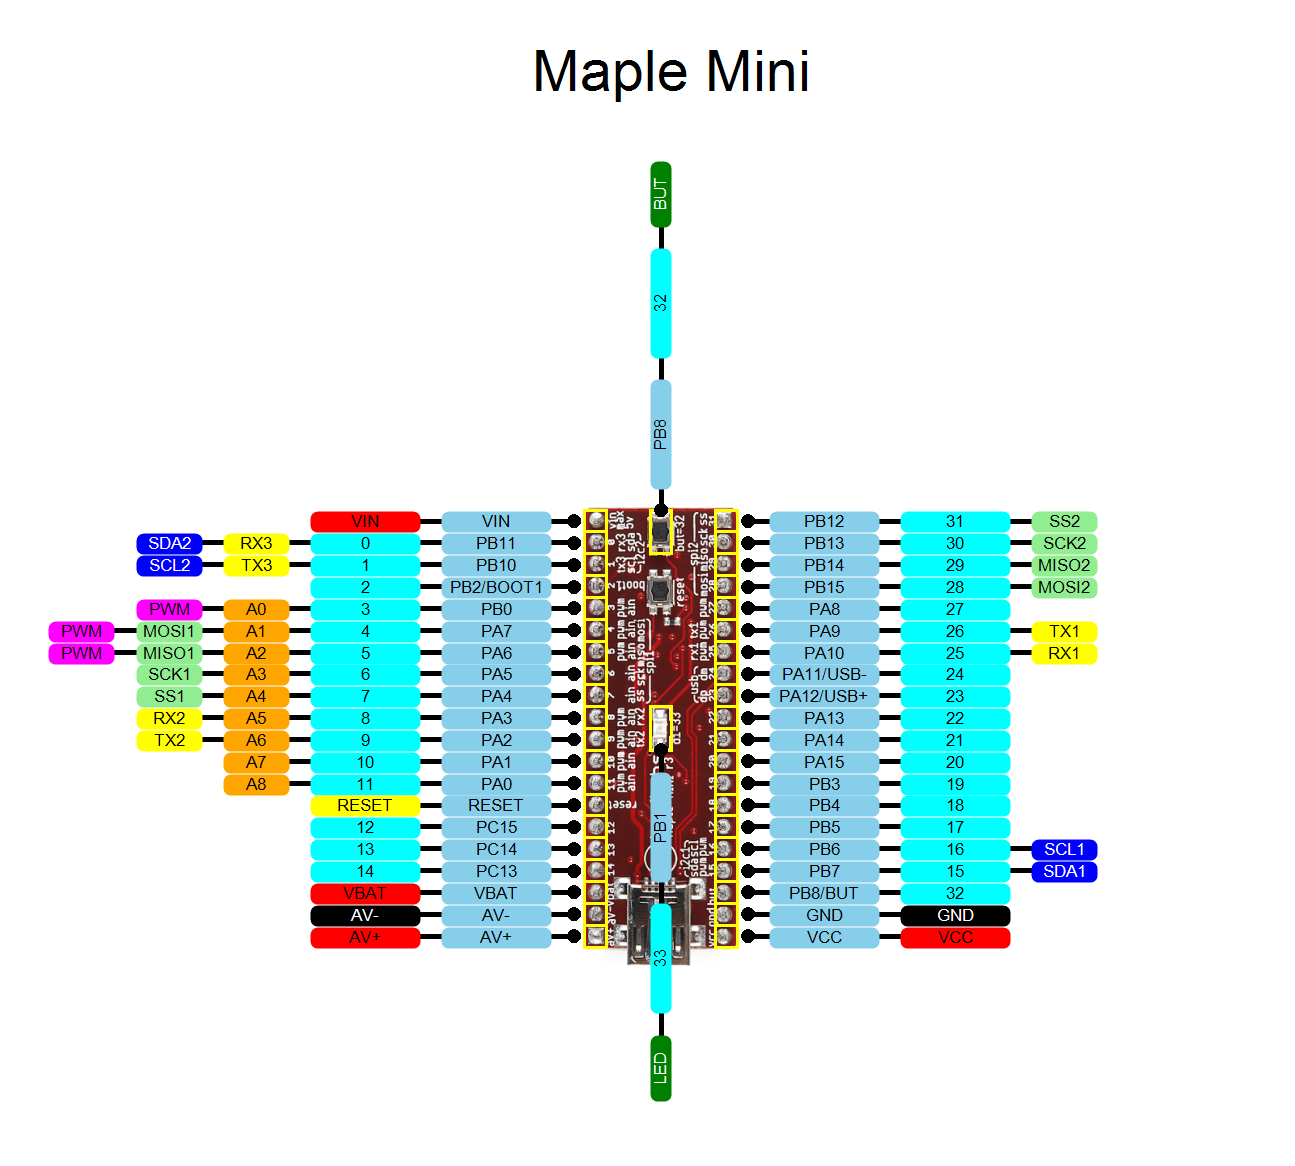 keyboard/stm32_f103_onekey/boards/maple_mini_mapping.png